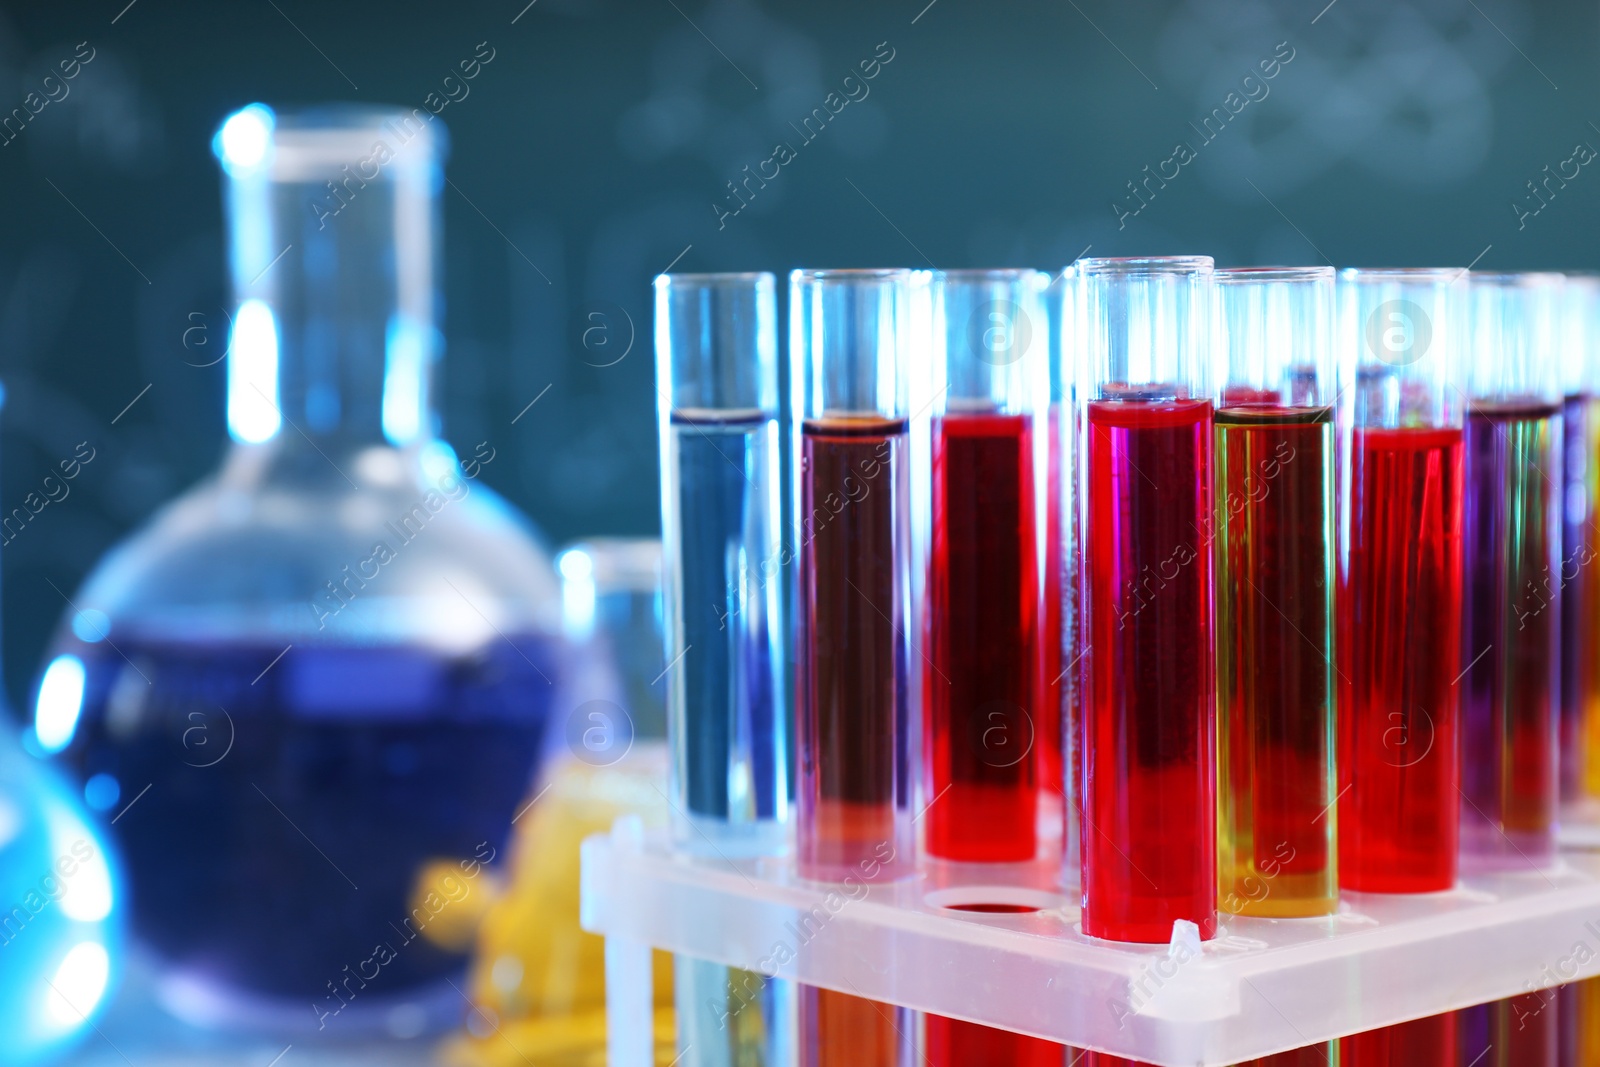 Photo of Closeup of test tubes in rack against blurred background, space for text. Chemistry glassware